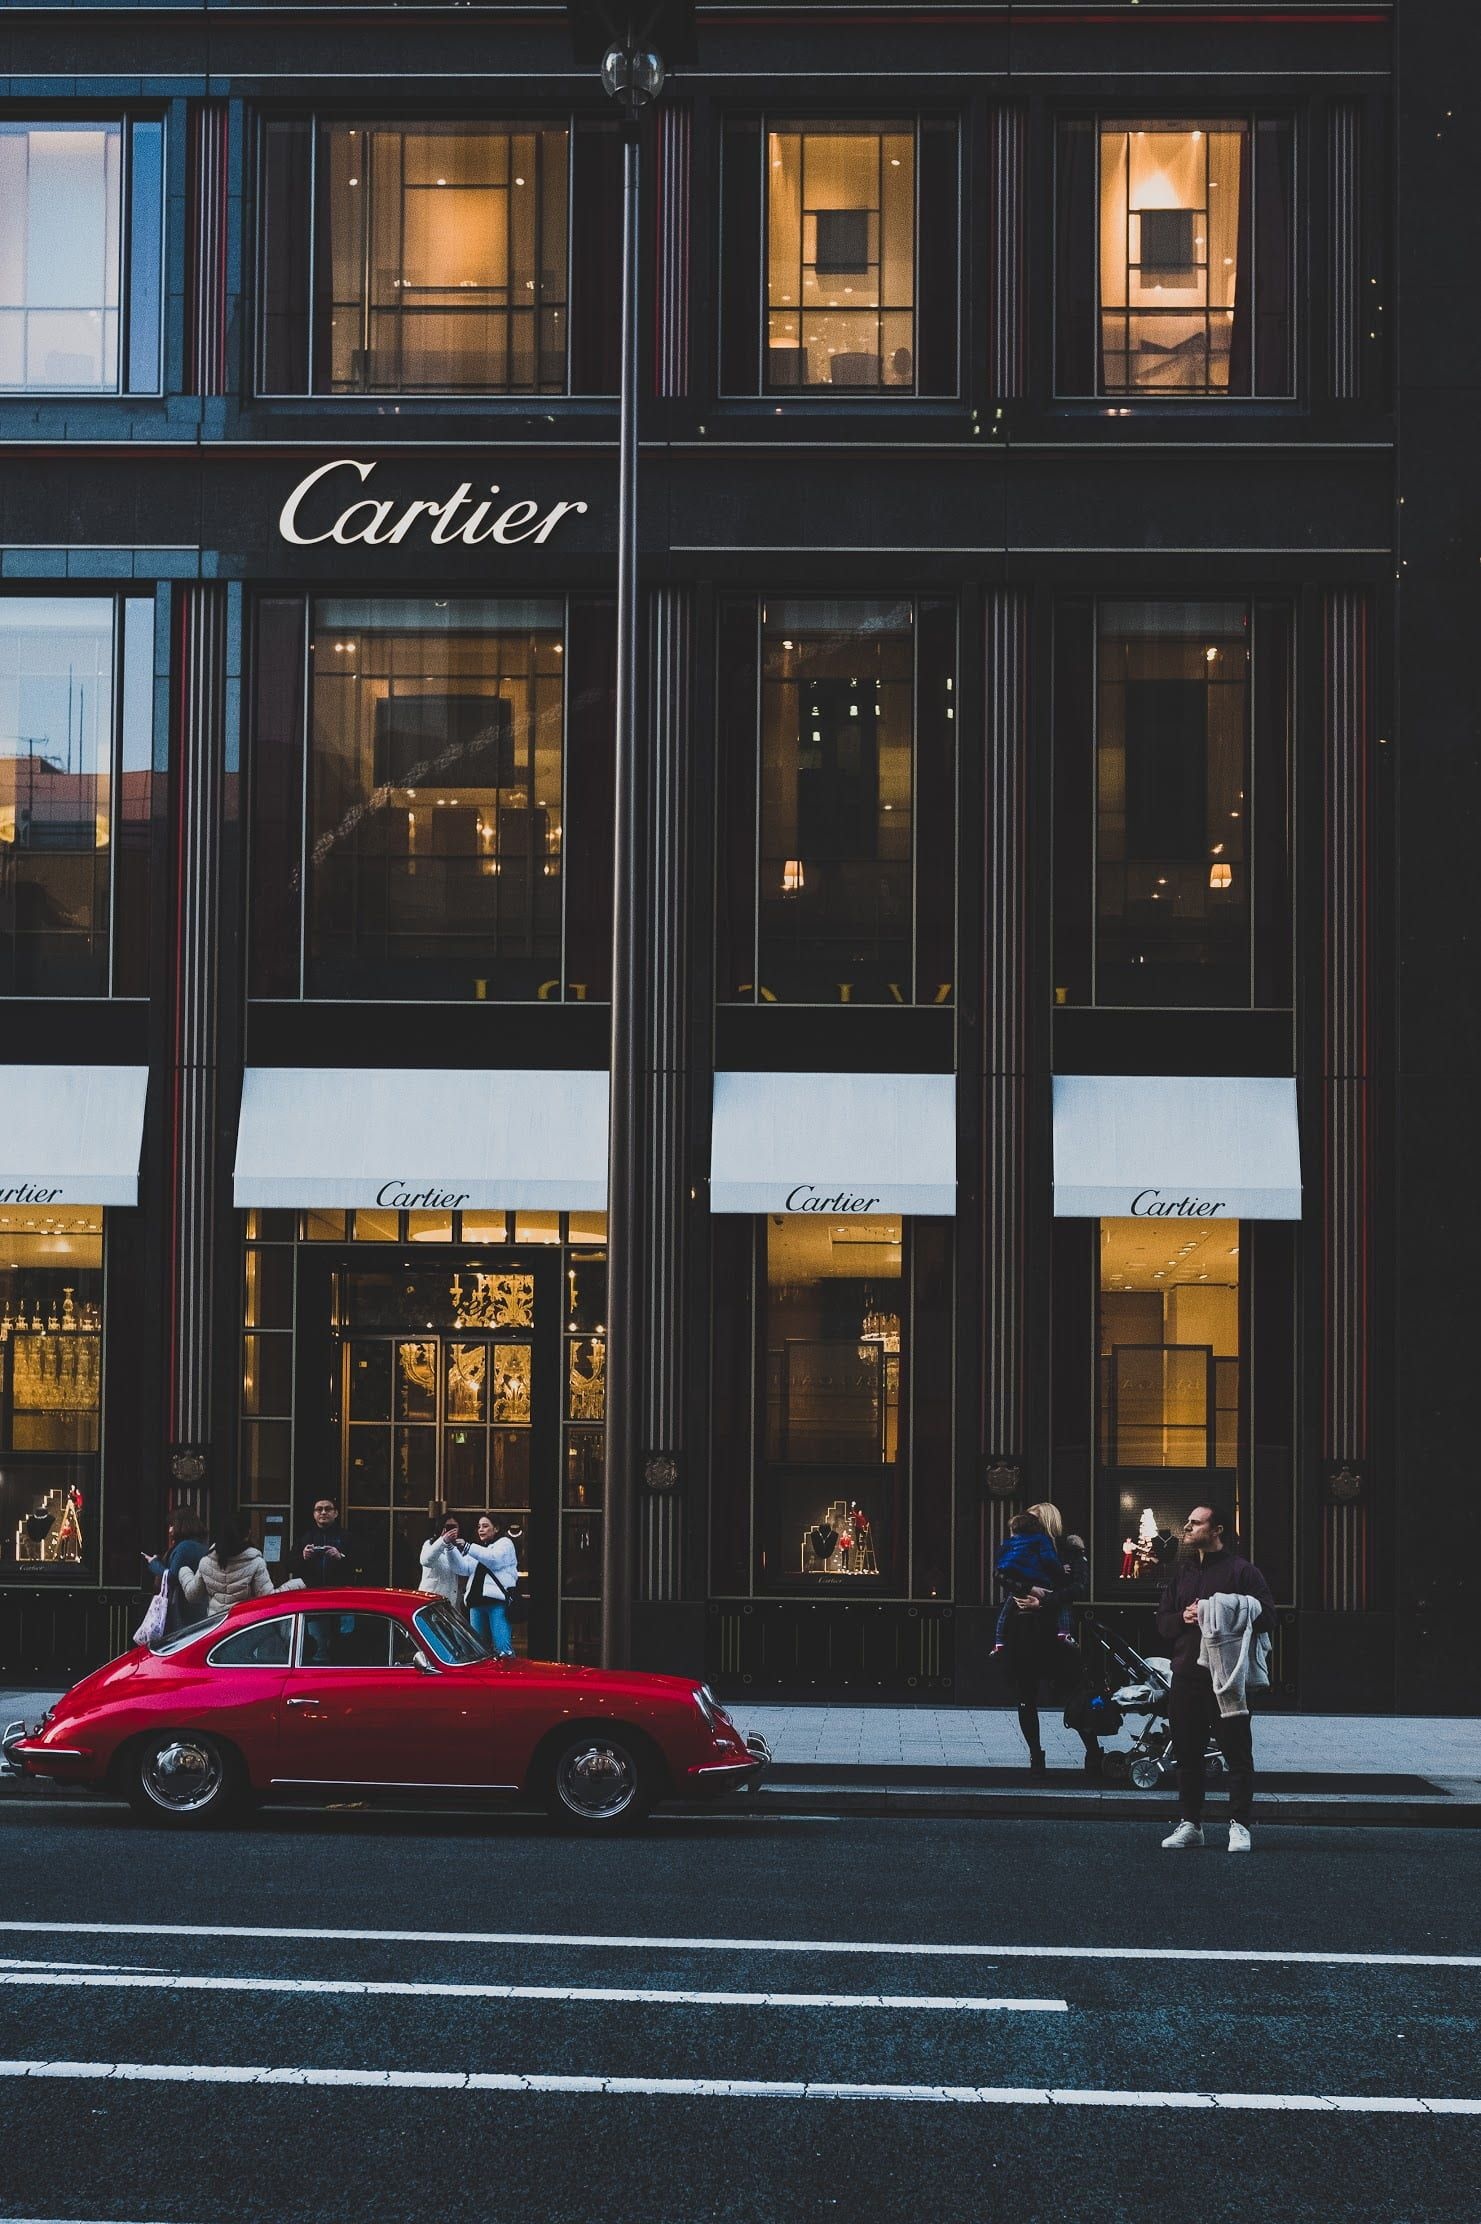 Cartier: One of the most important and recognizable jewelry houses in the world, Boutique. 1490x2230 HD Wallpaper.